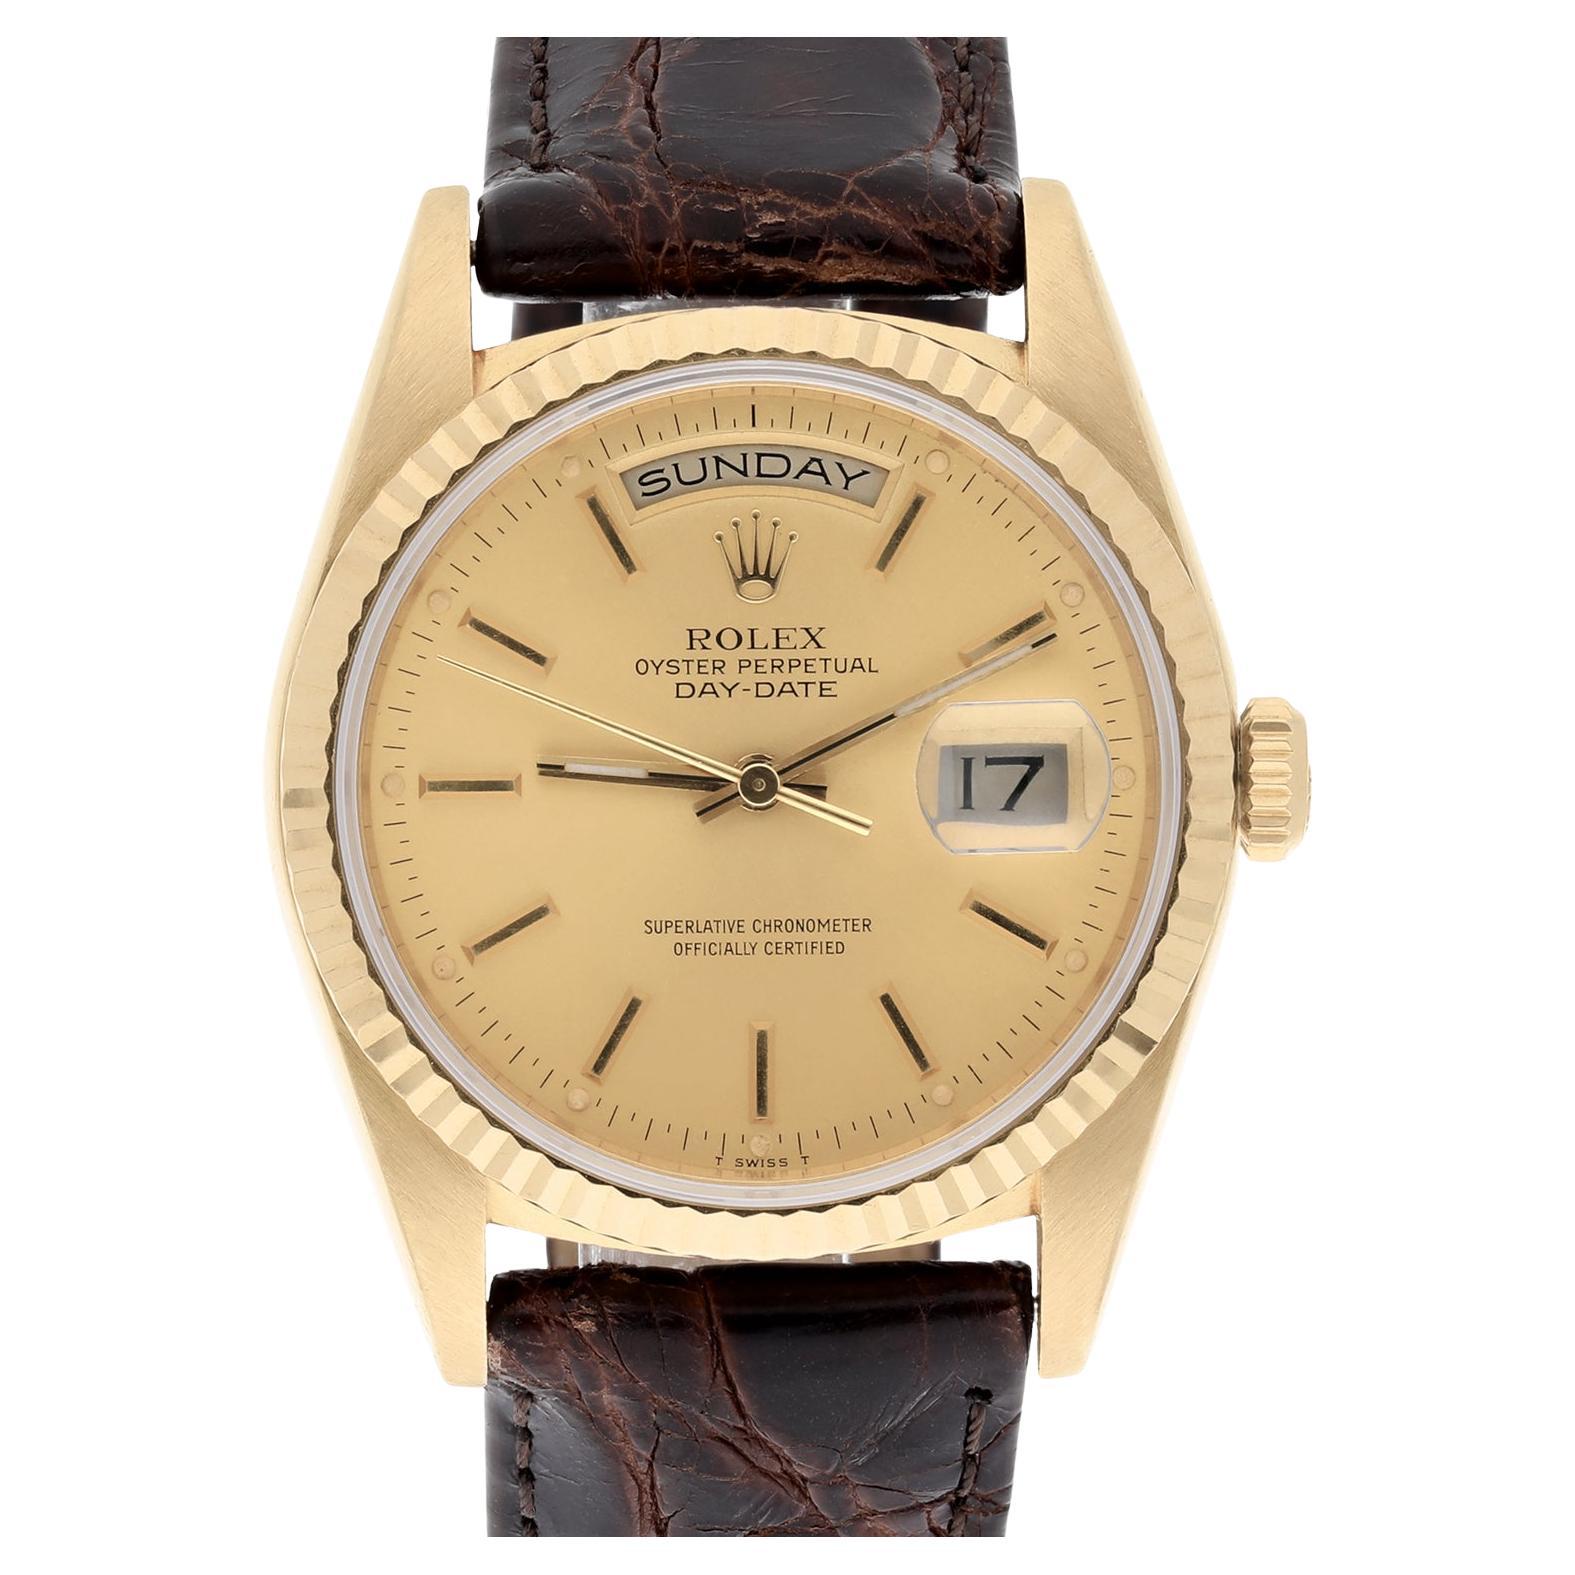 Rolex Day-Date 18238 36mm 18K Yellow Gold Watch Fluted Bezel Champagne Dial